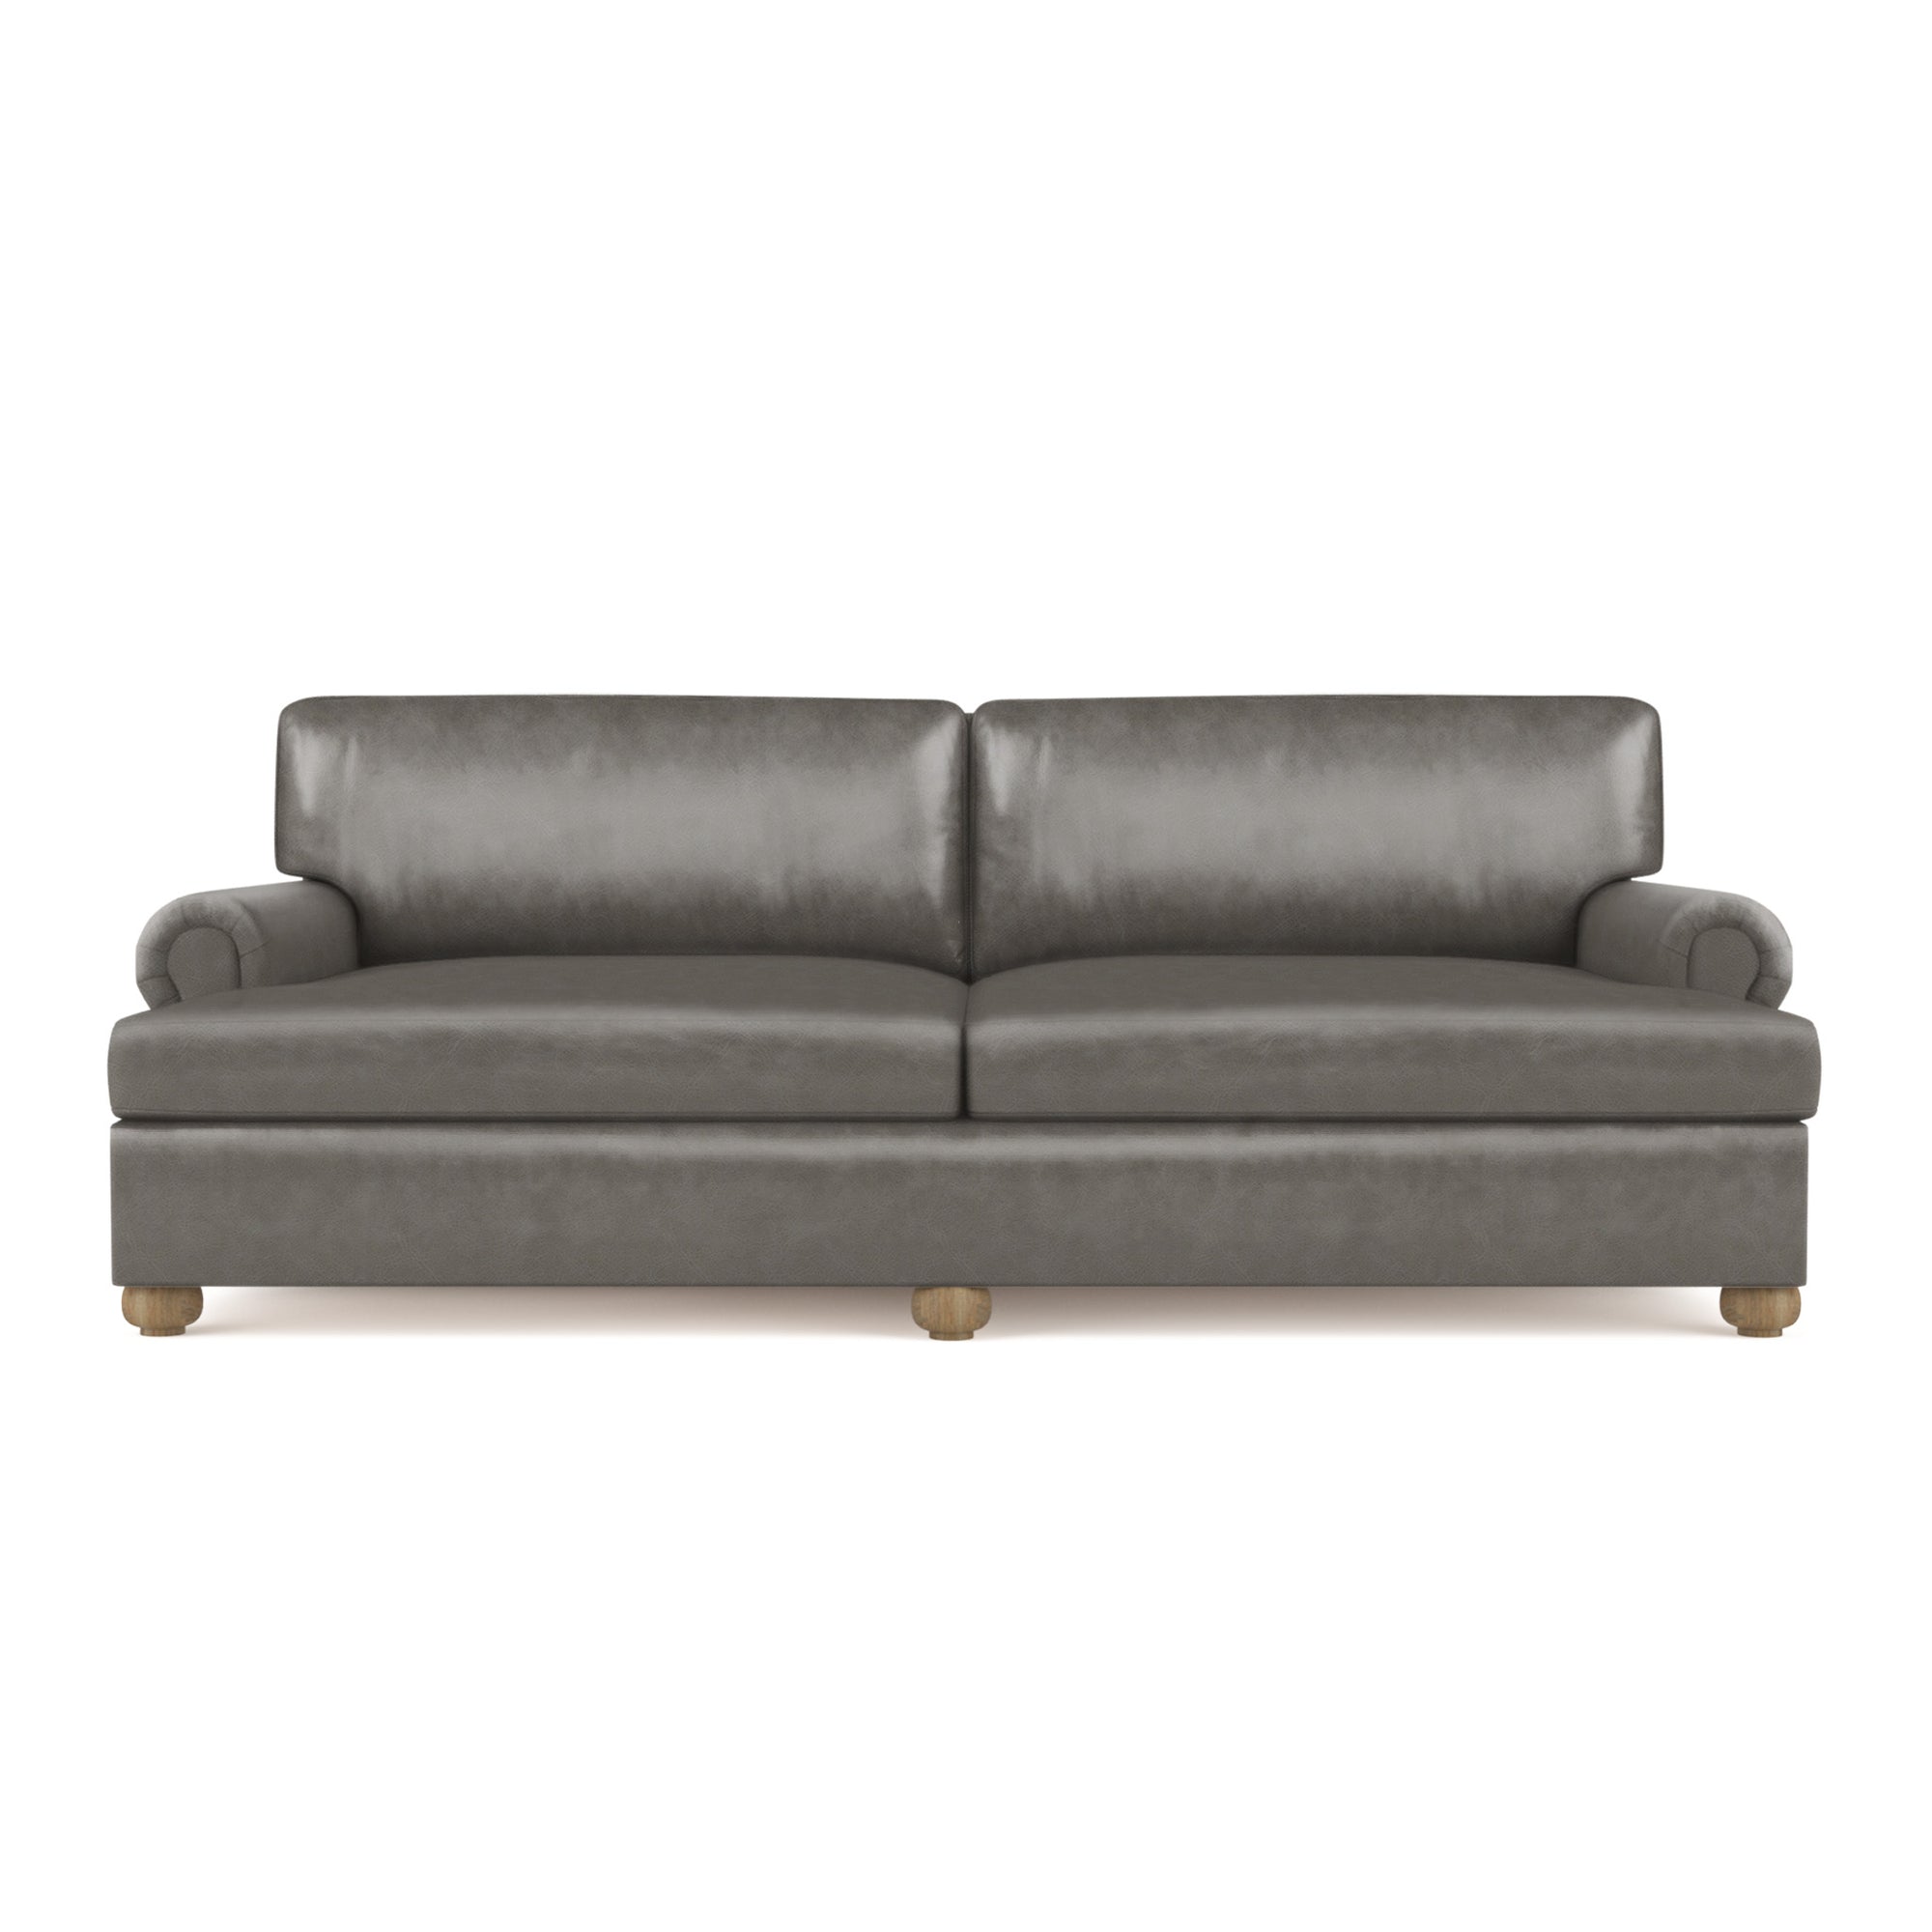 Leroy Daybed - Pumice Vintage Leather